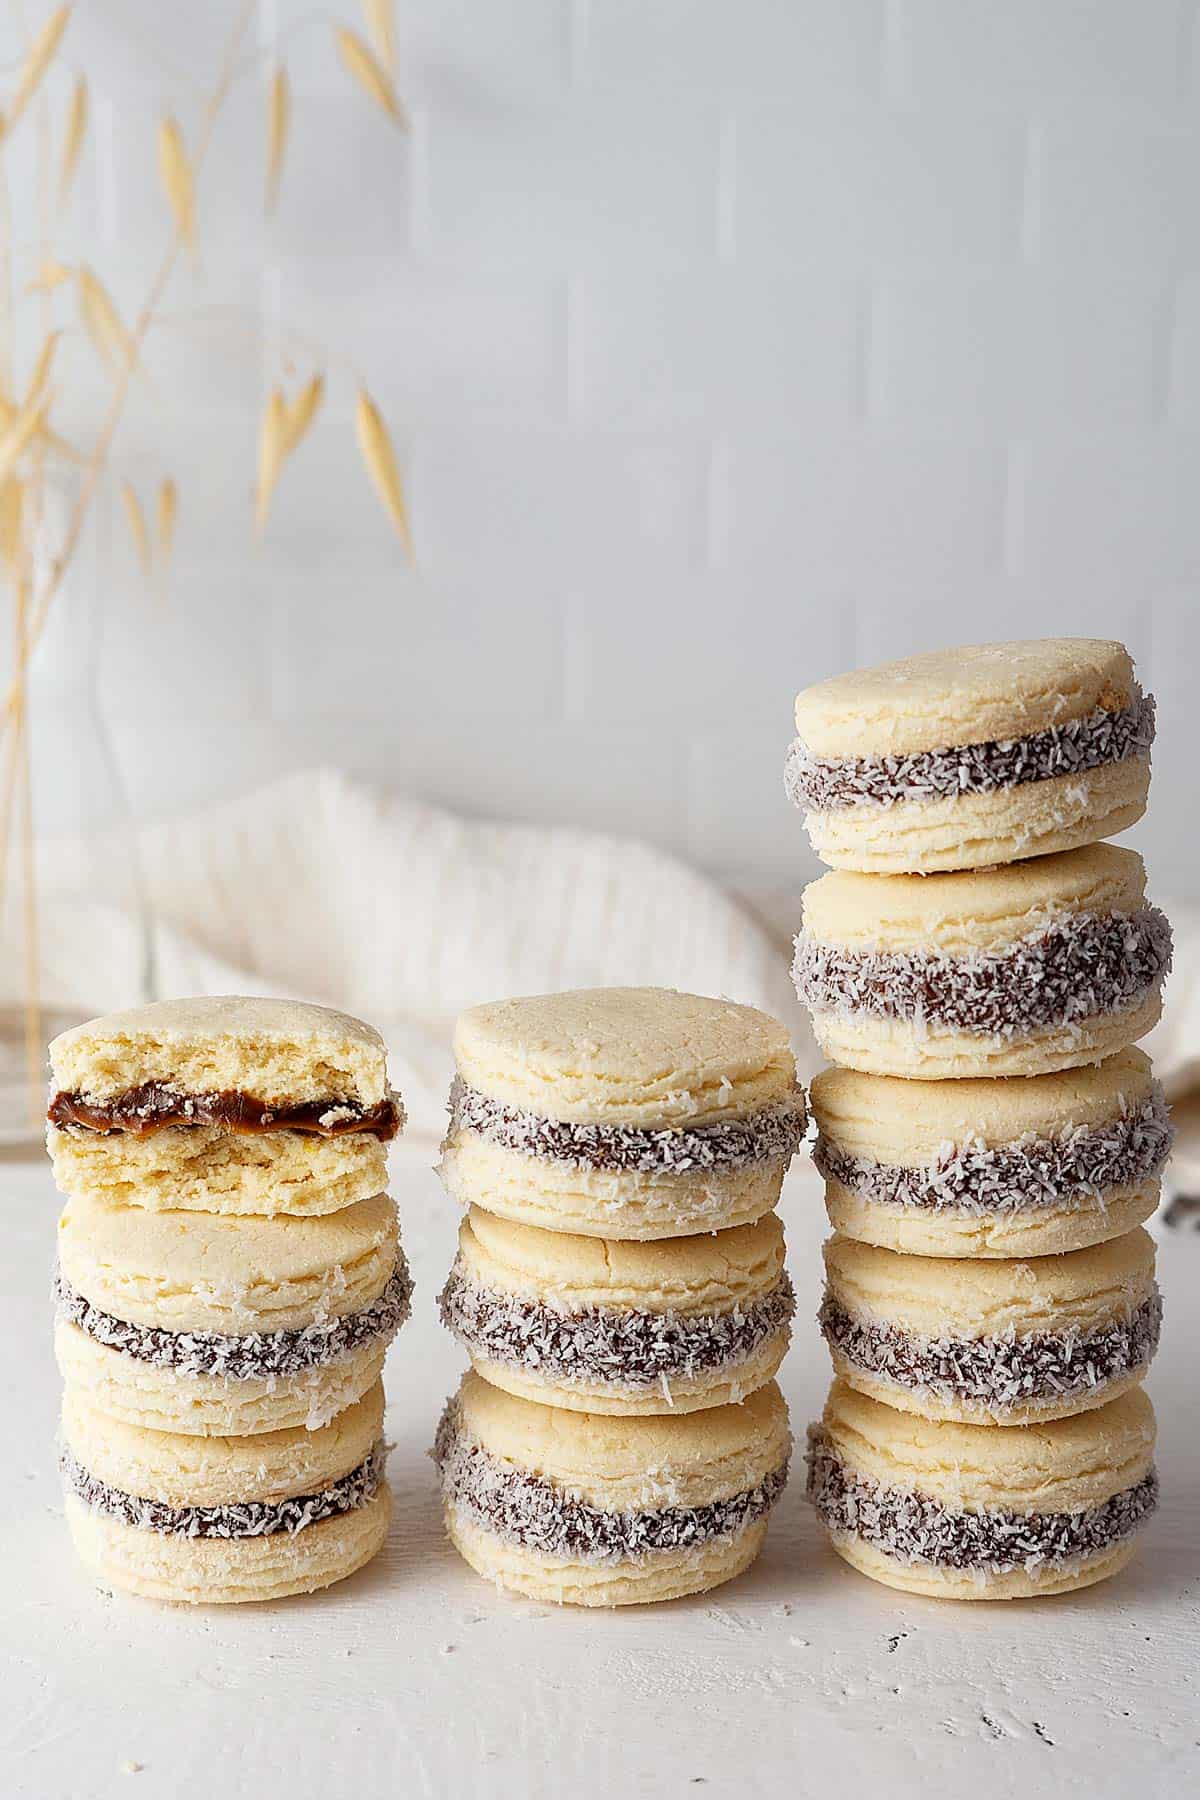 Argentinian Cookies: A Delicious Guide To Alfajores